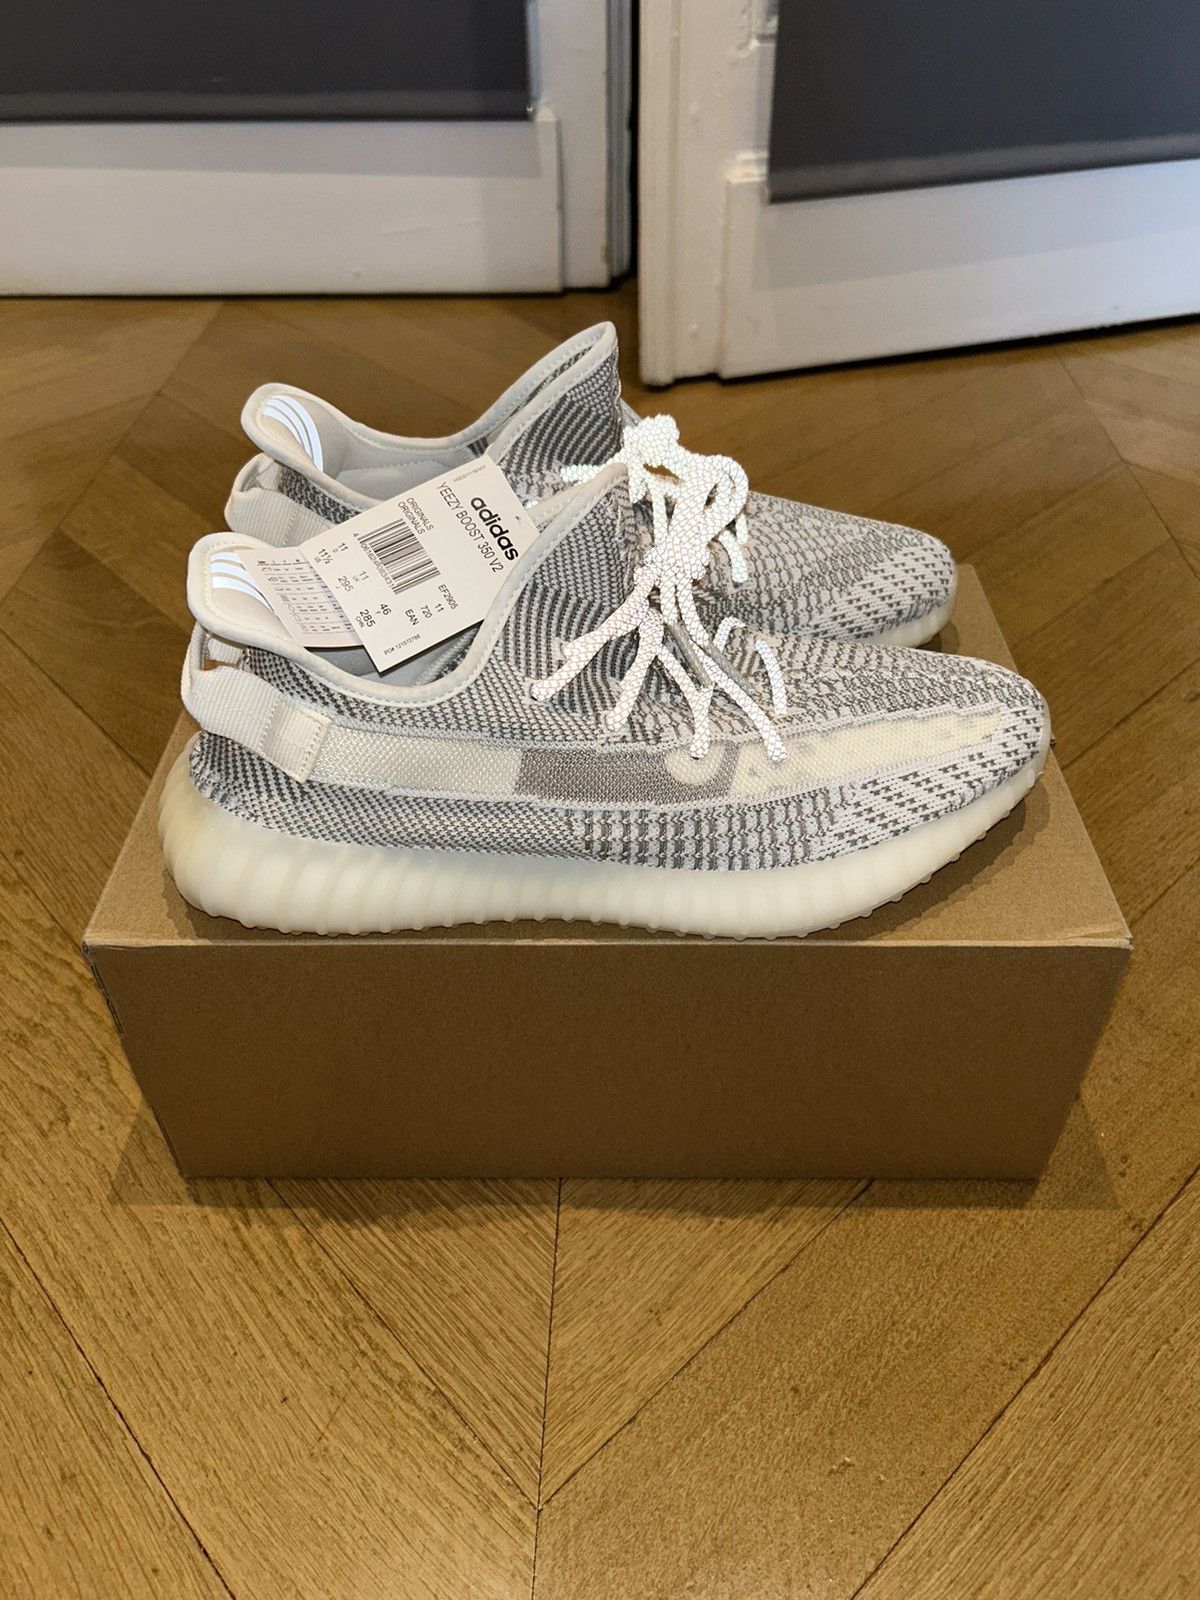 Adidas Yeezy Boost 350 V2 Static Non-Reflective | Grailed